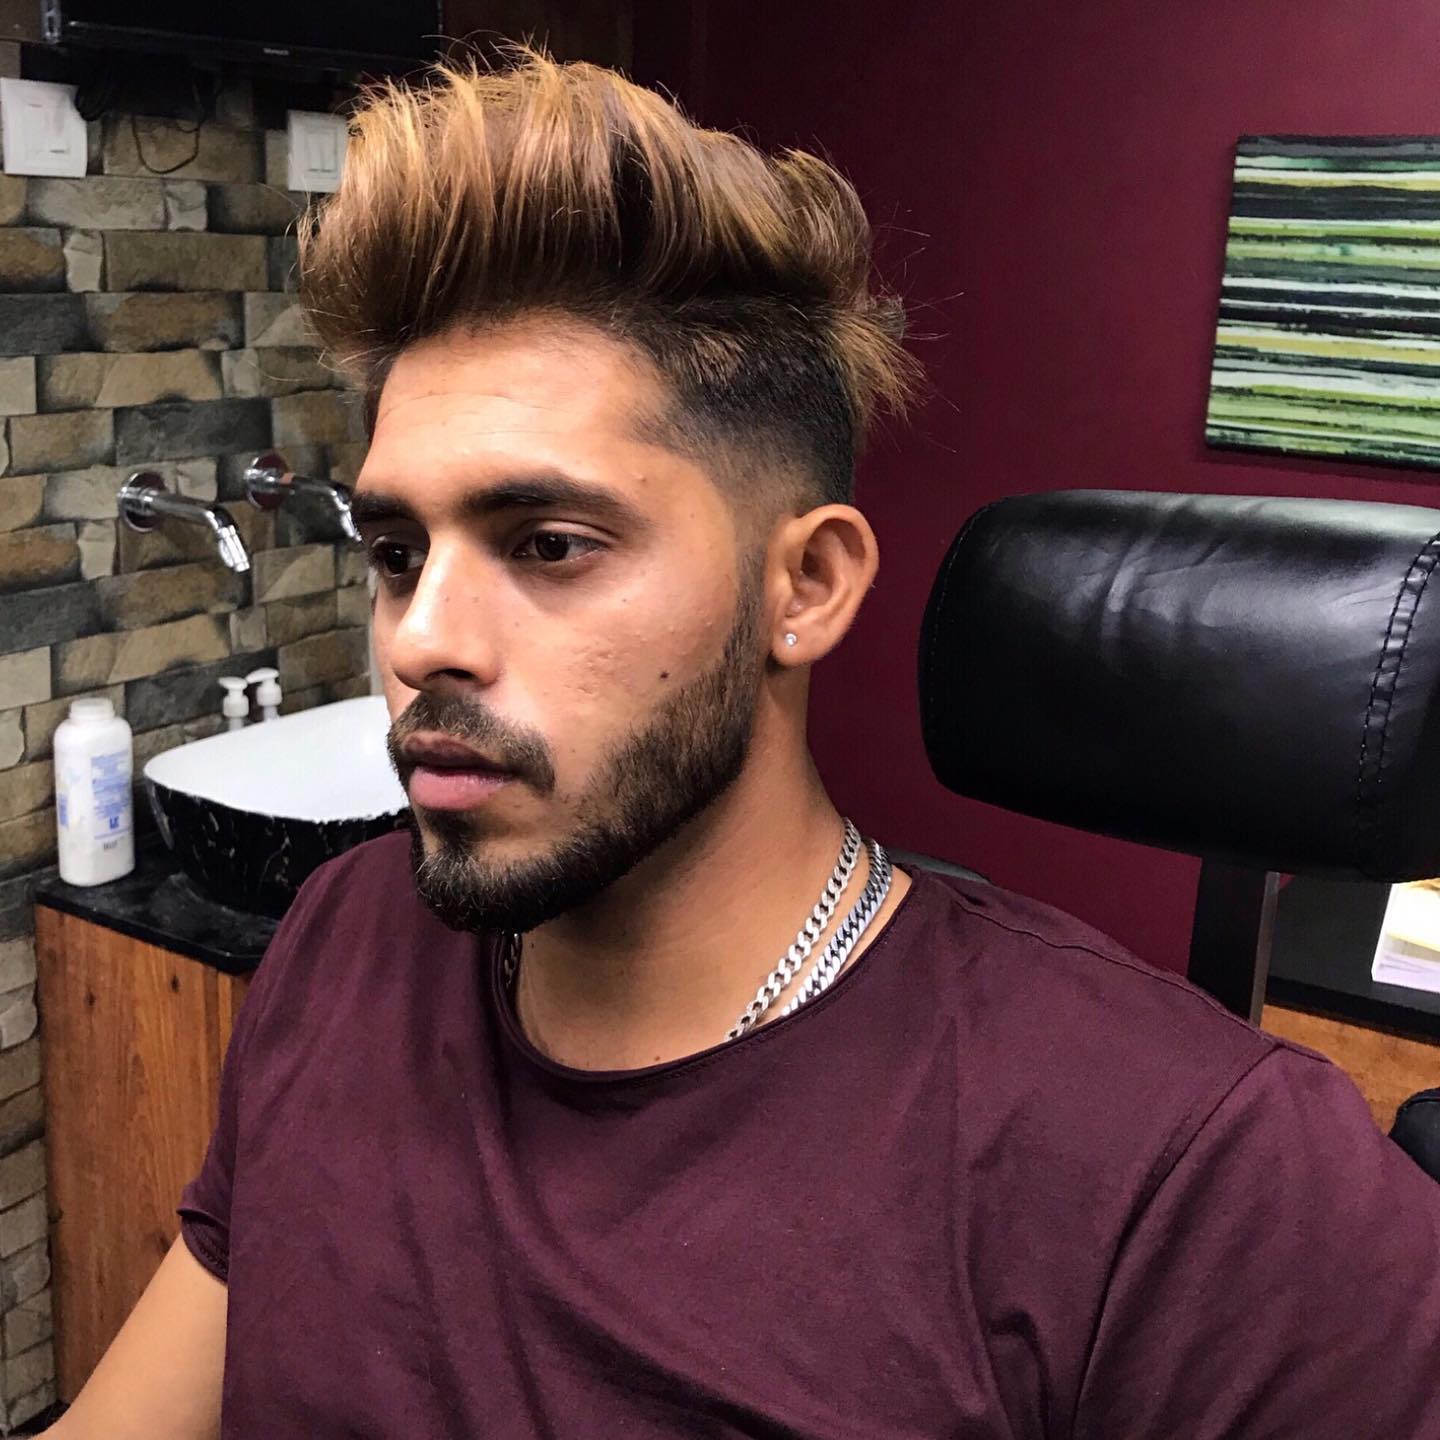 Messy hairstyle for Men 5 Medium messy hairstyles for guys | Messy fade haircut | Messy hairstyles for medium hair Messy hairstyles for Men